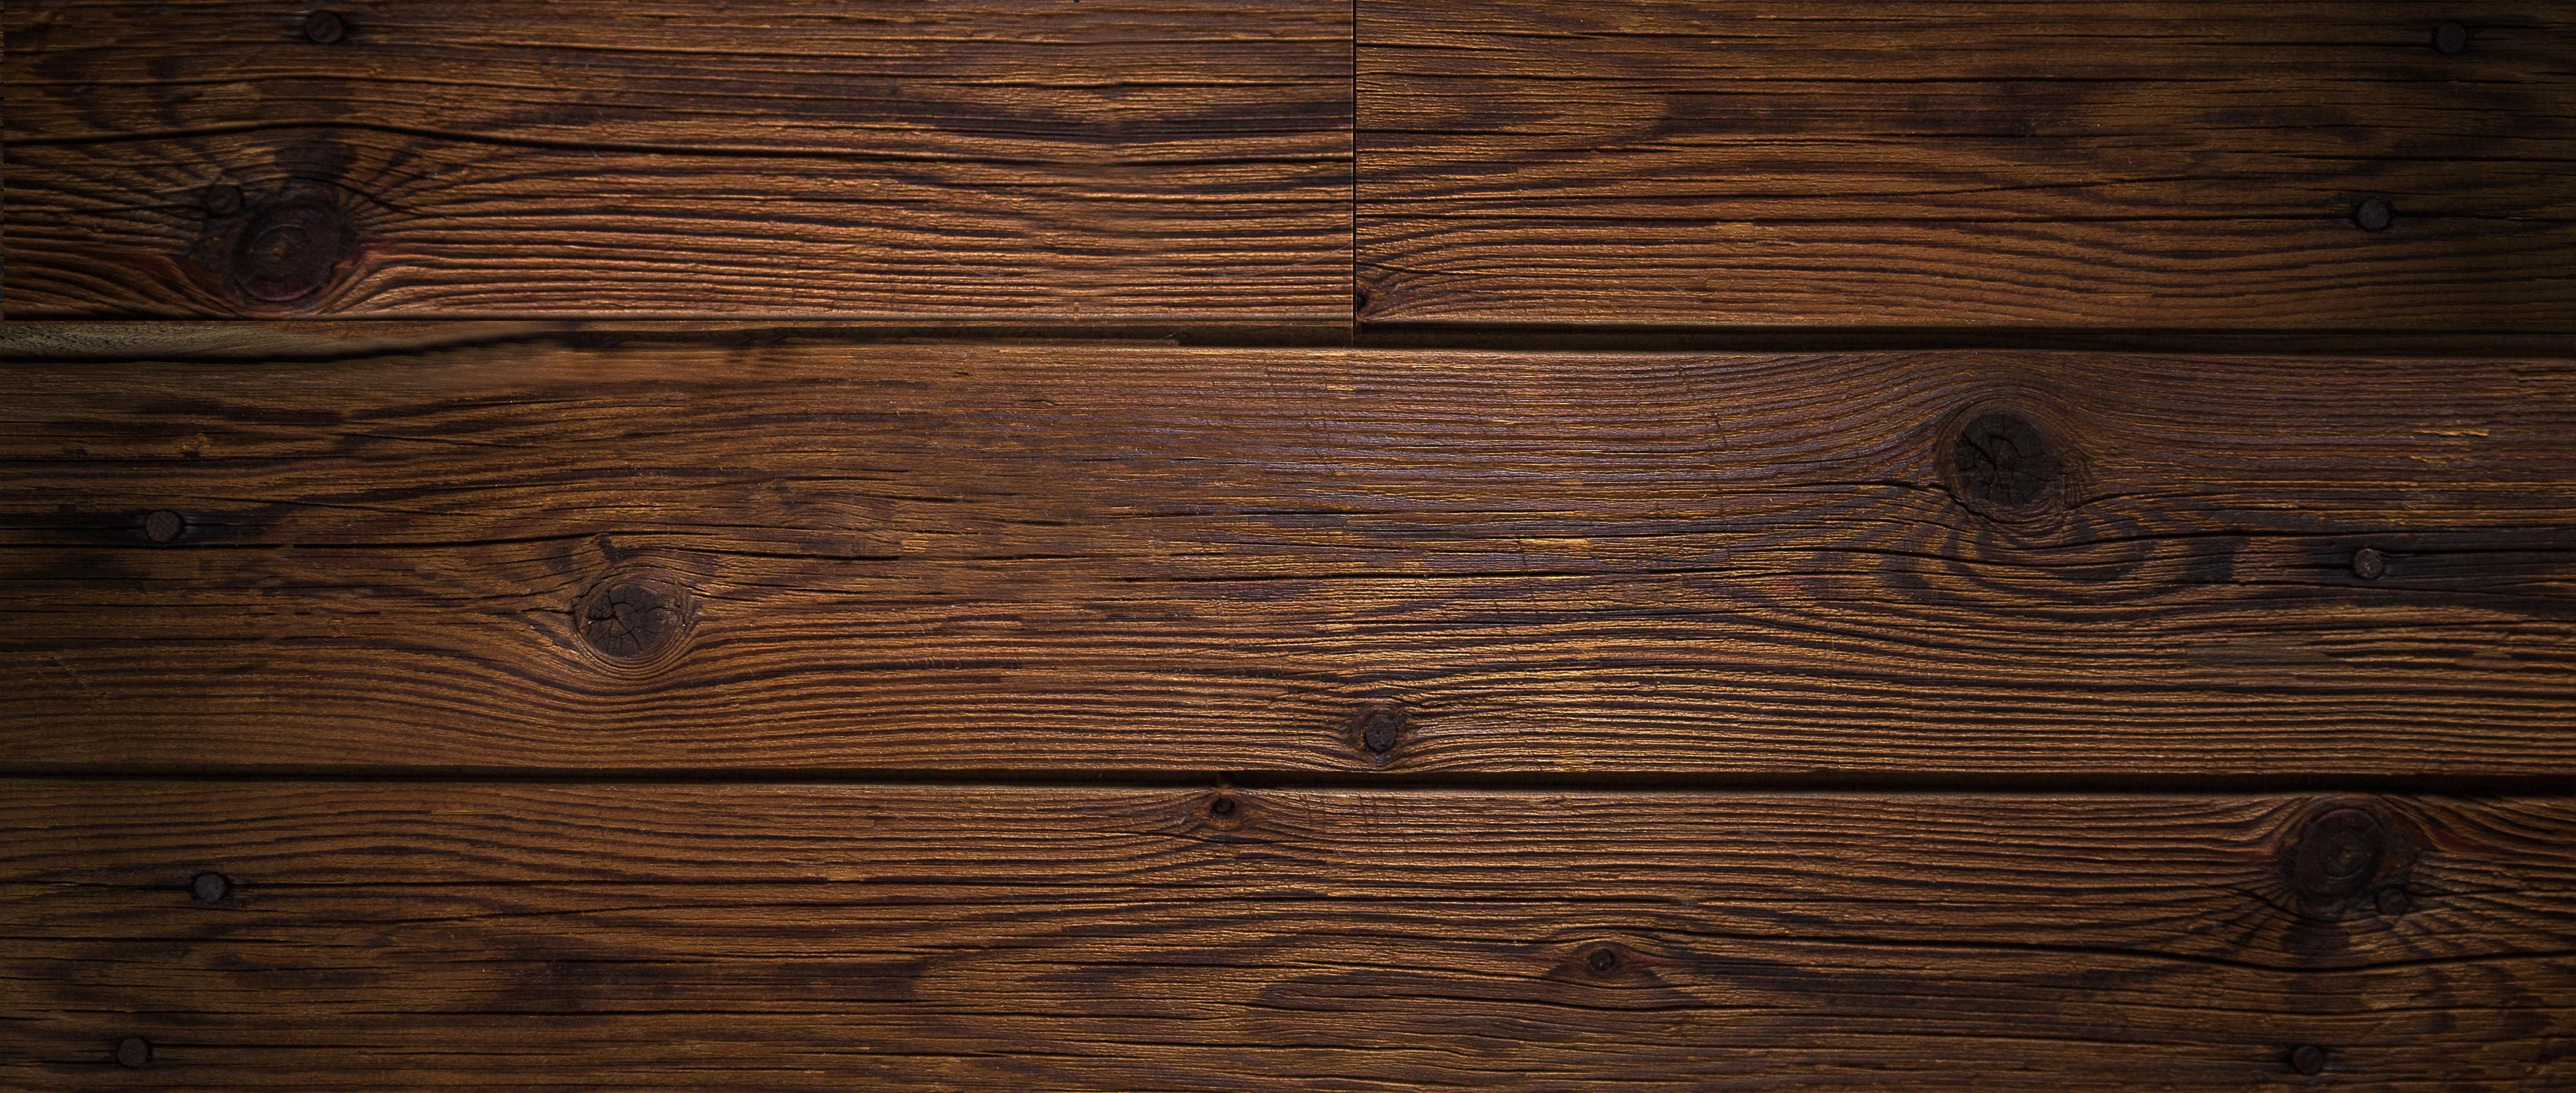 Great Wood Texture Photo